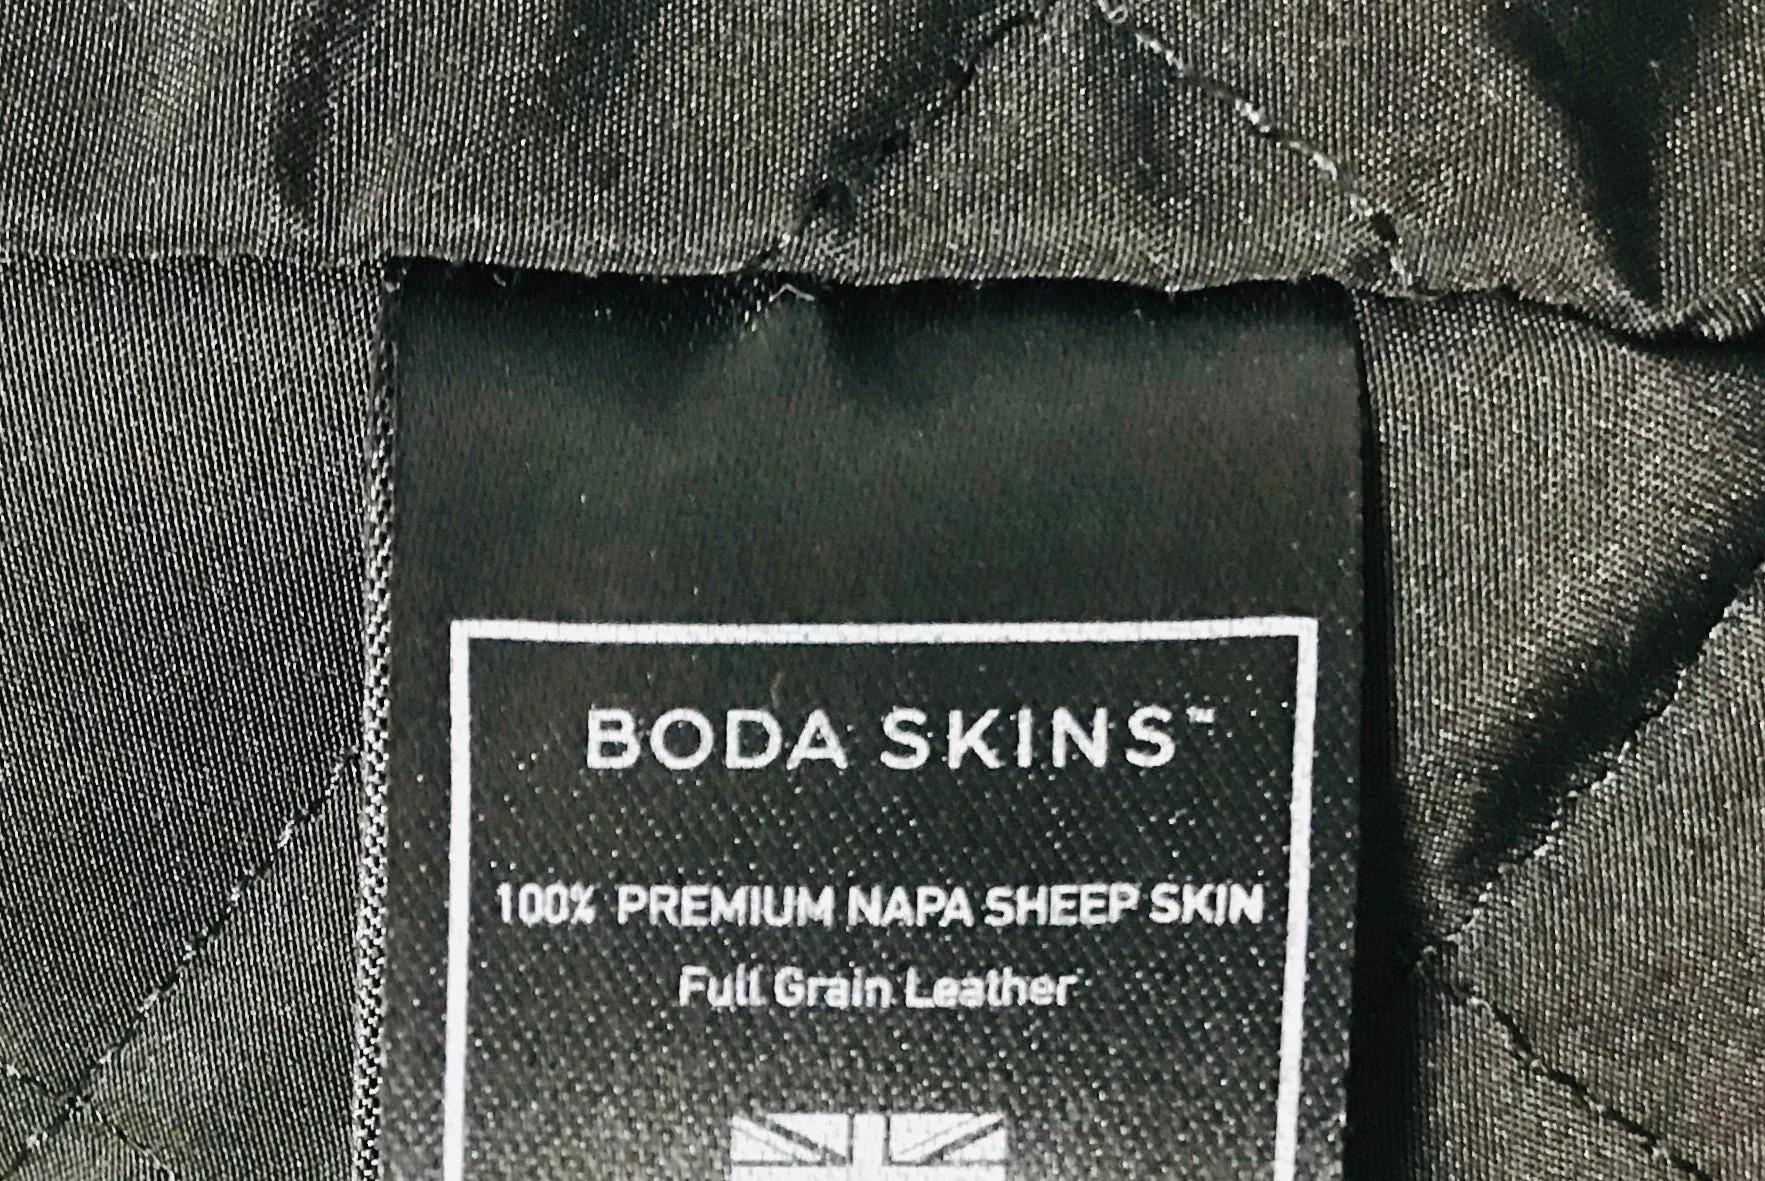 Boda Skins Leather Jacket In Excellent Condition For Sale In London, GB